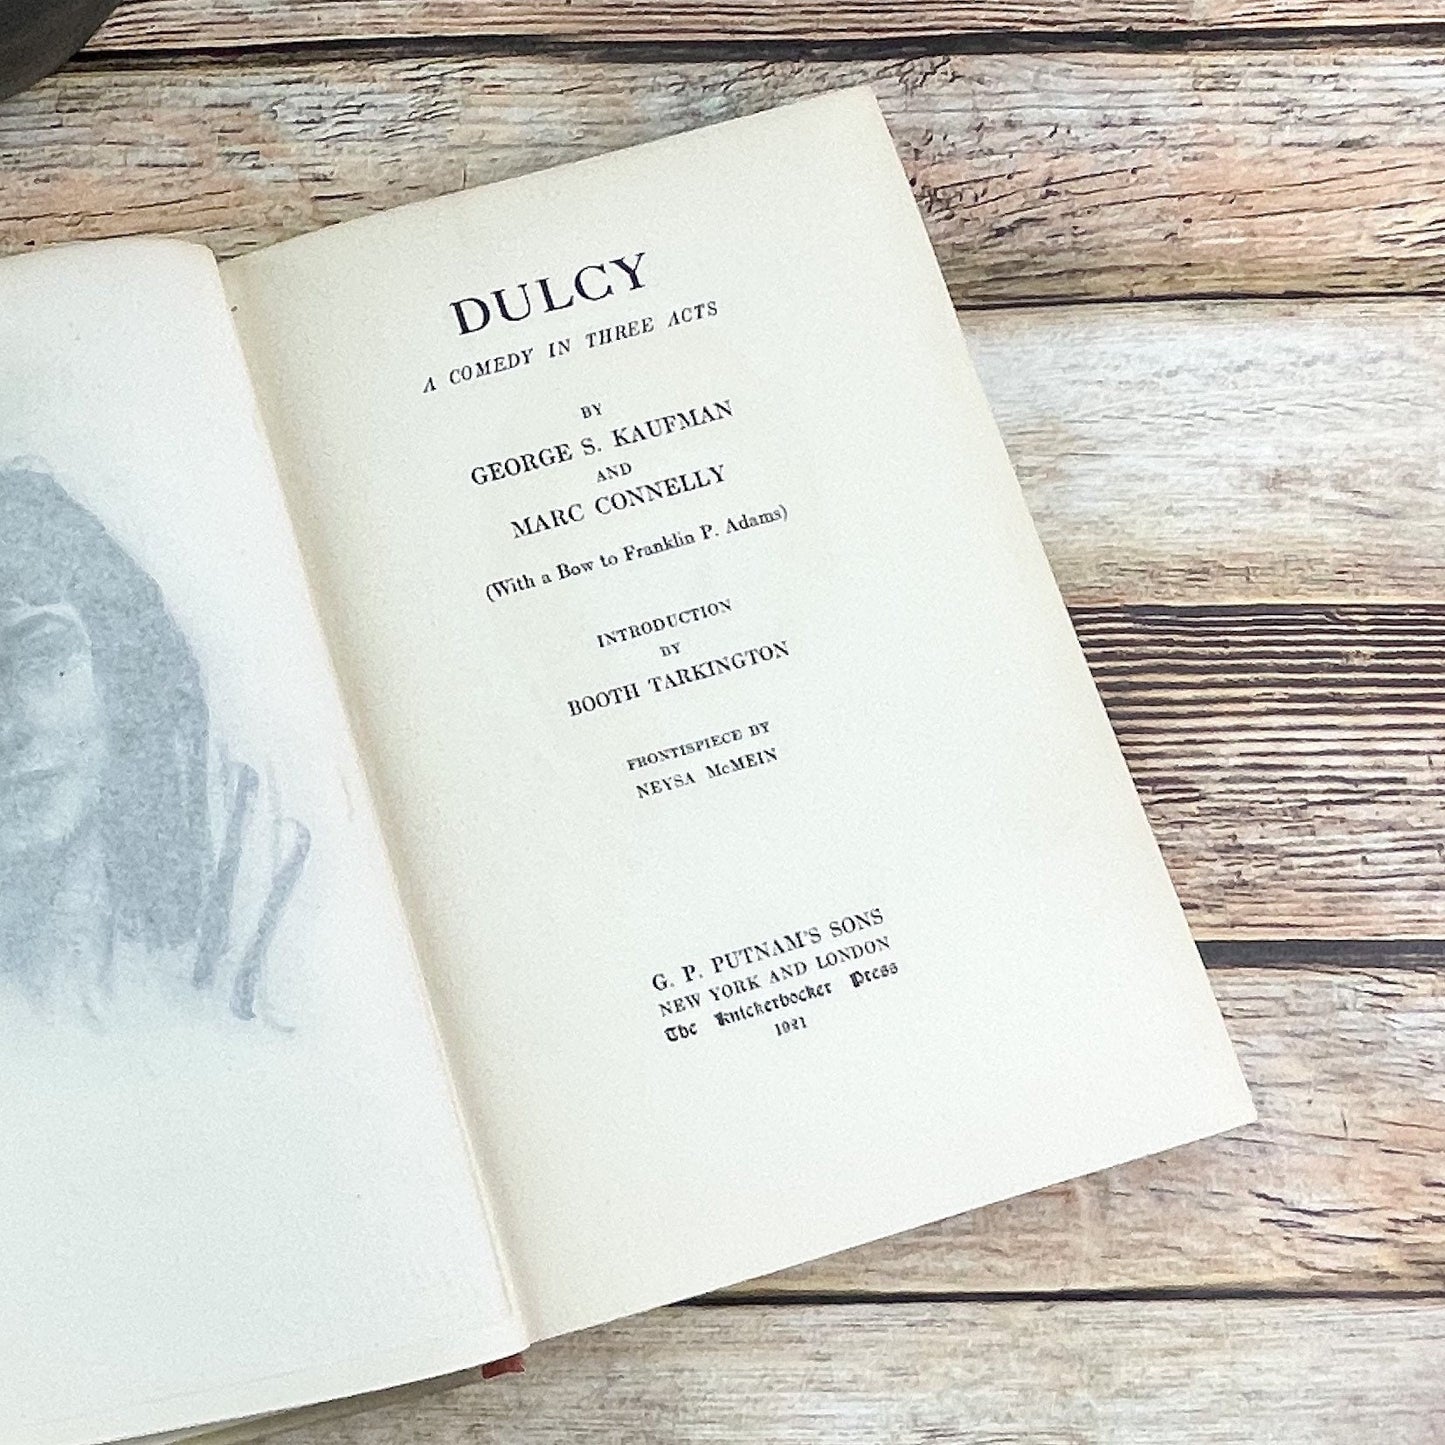 Old Book, Dulcy: A Comedy in Three Acts by George S. Kaufman and Marc Connelly